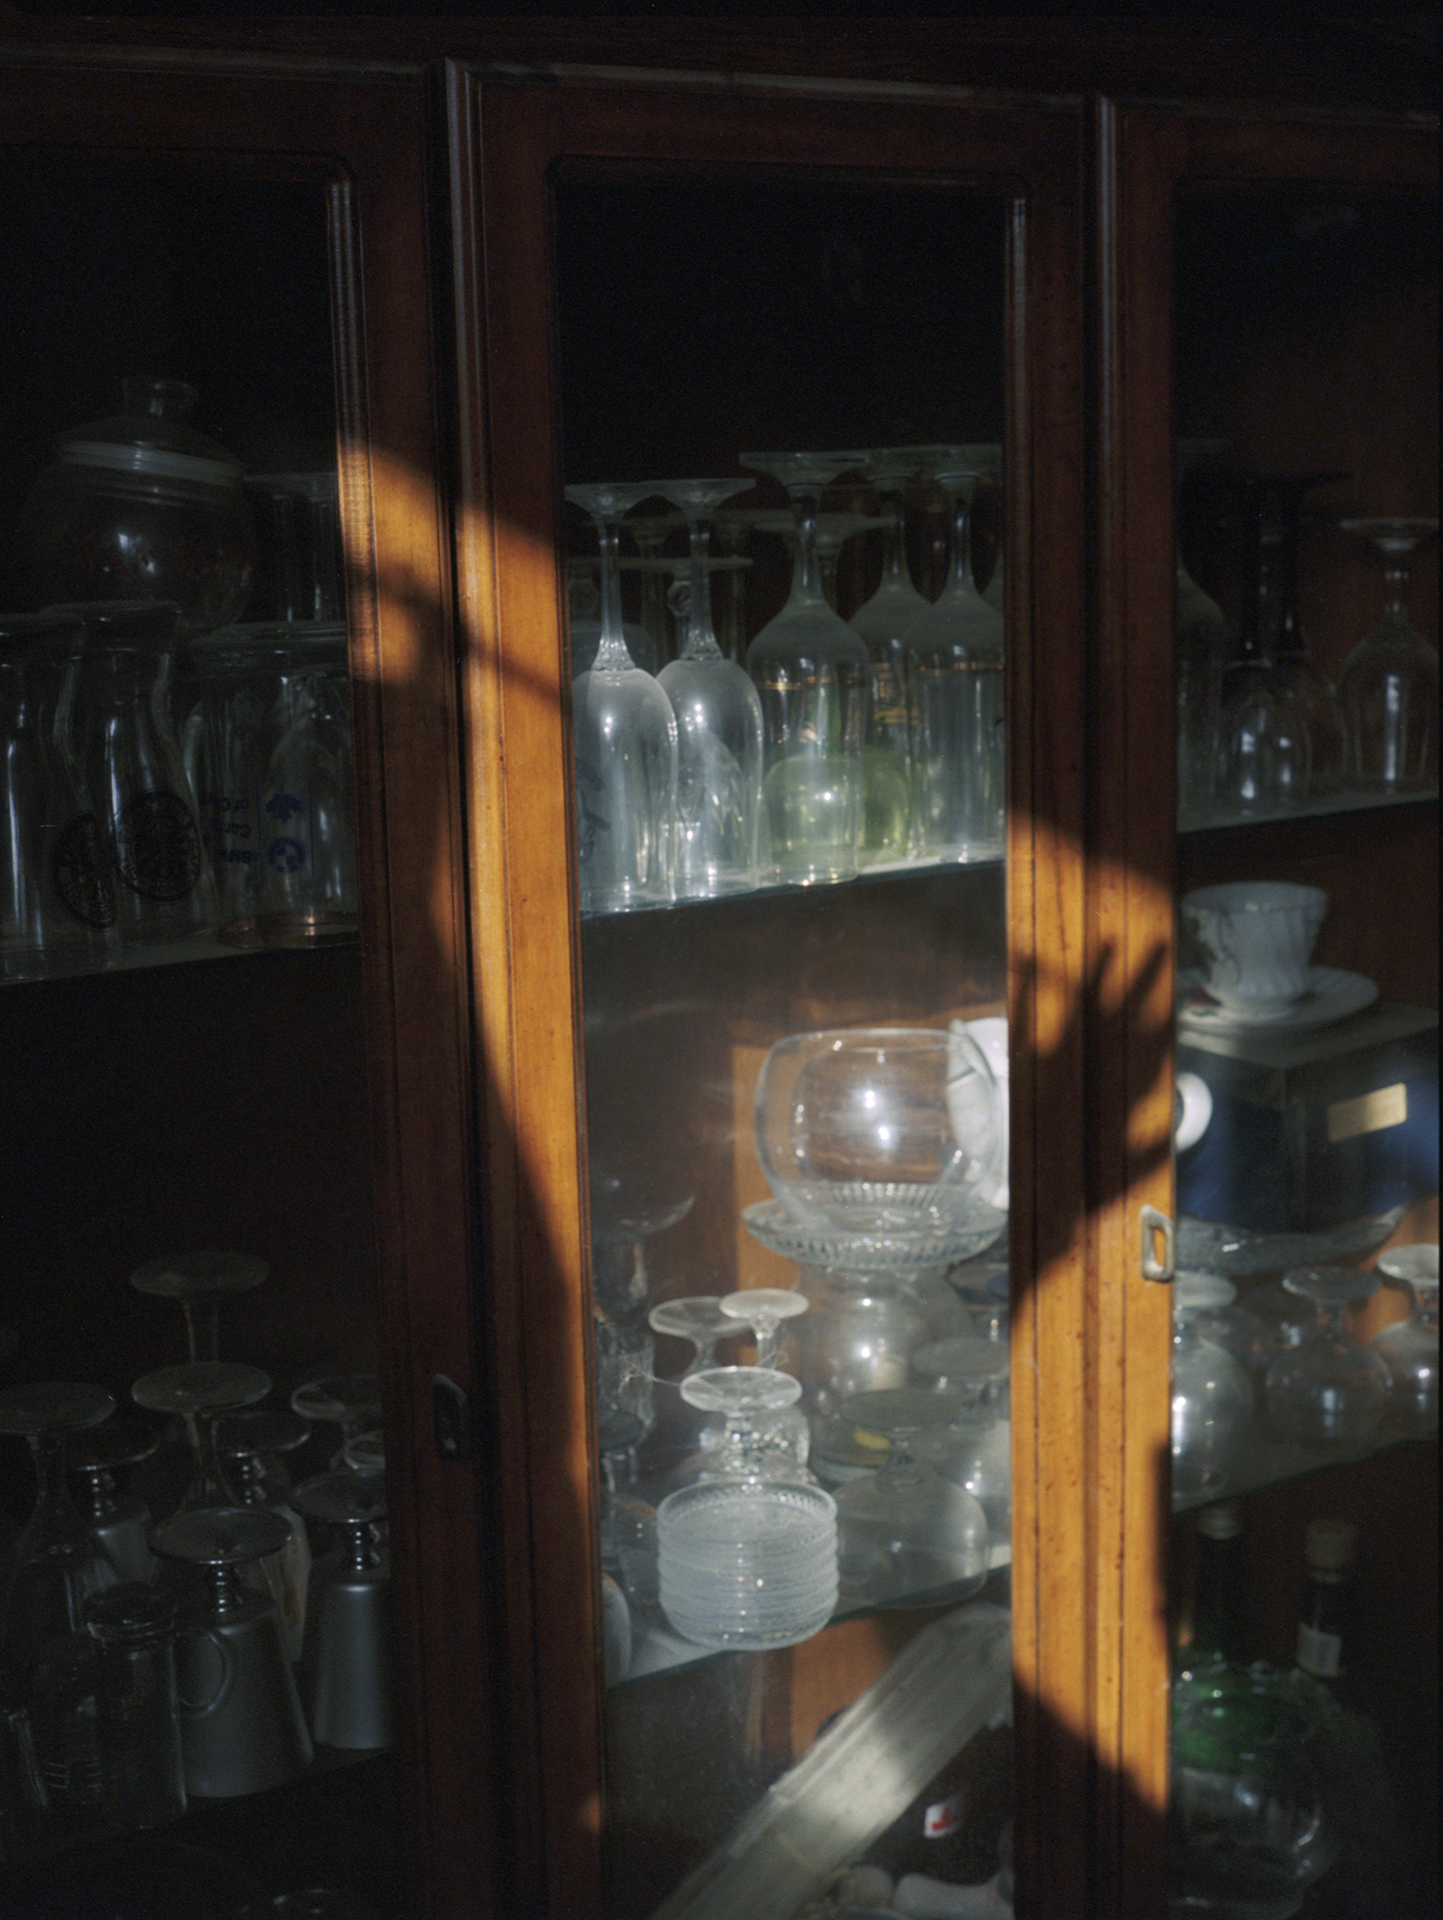 A reflection and shadow of a hand in the evening sunlight as it lays over a glass cabinet containing wine glasses.